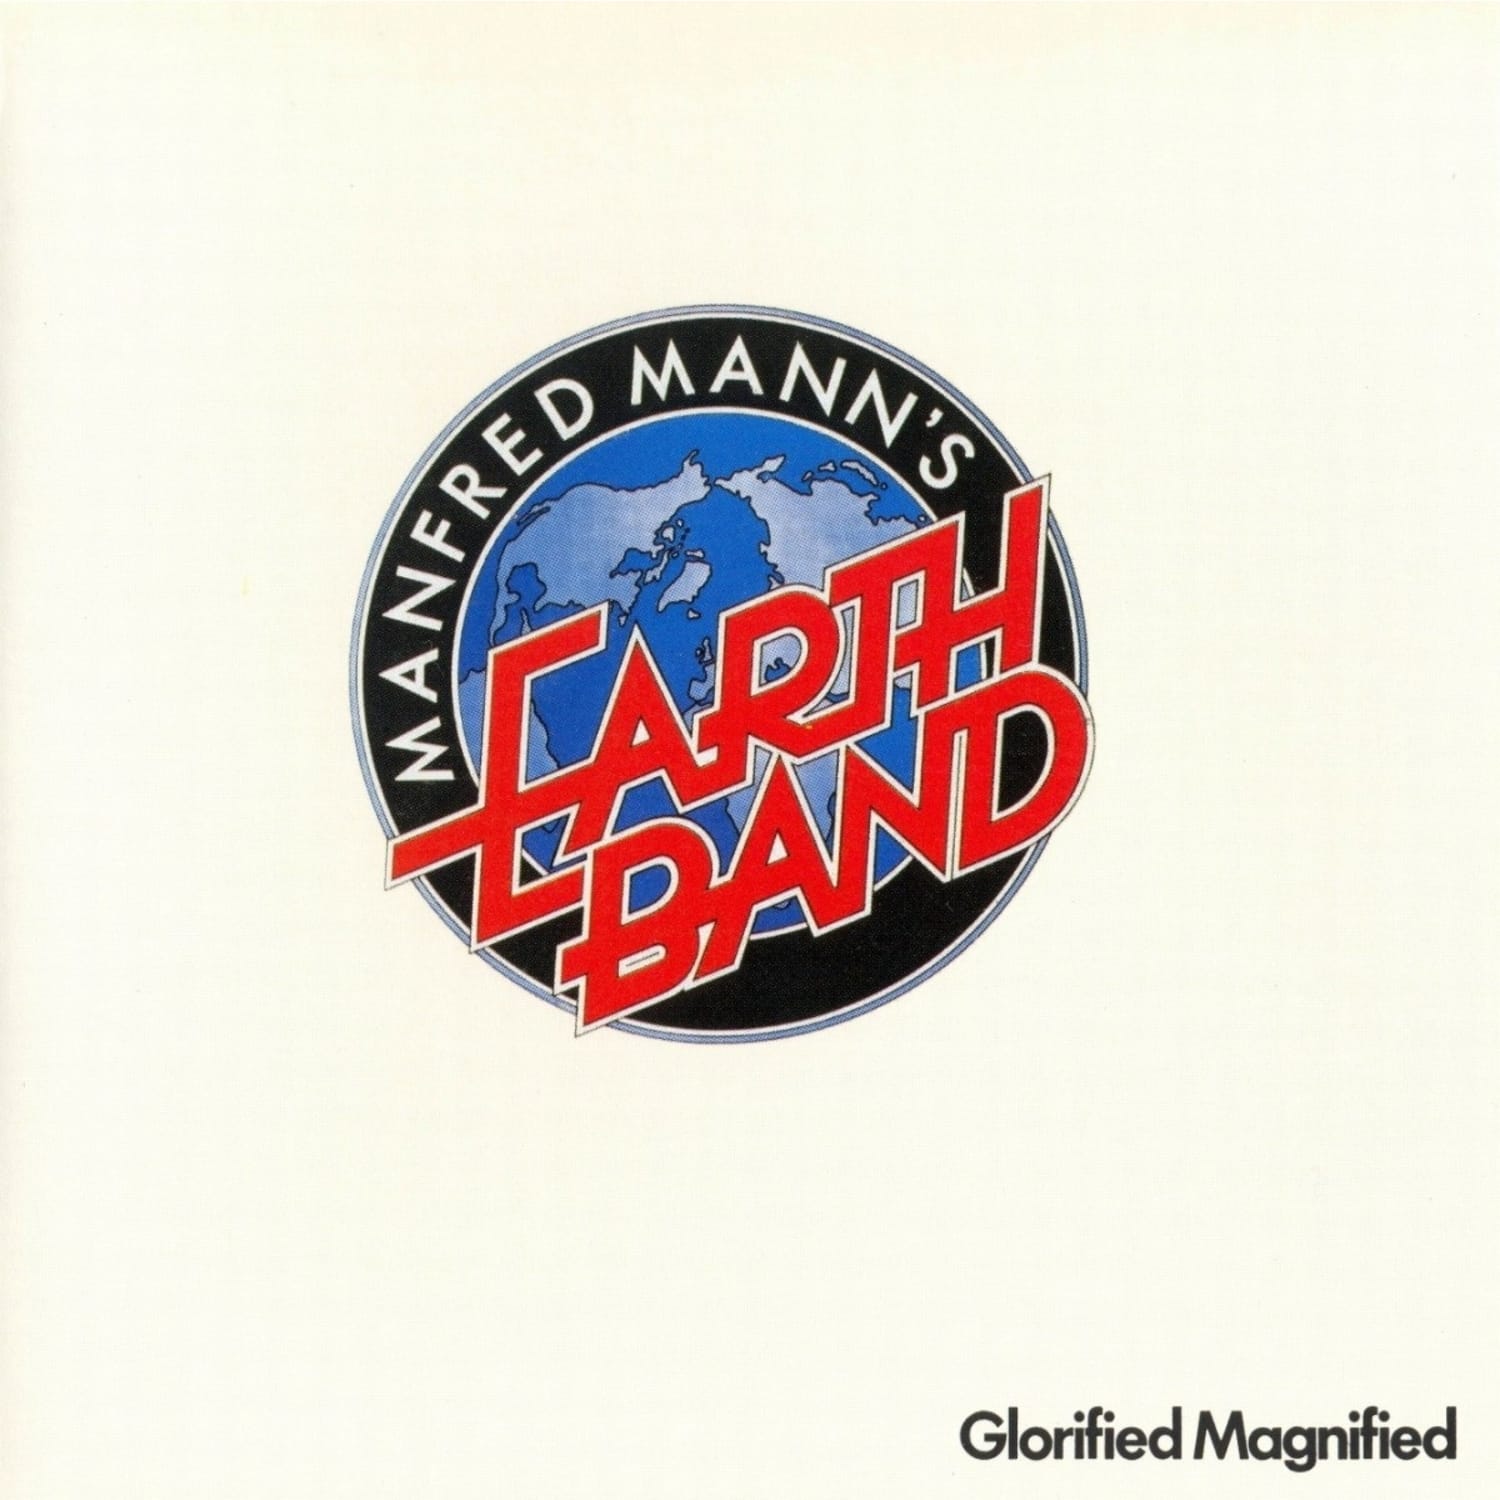 Manfred Mann s Earth Band - GLORIFIED MAGNIFIED 